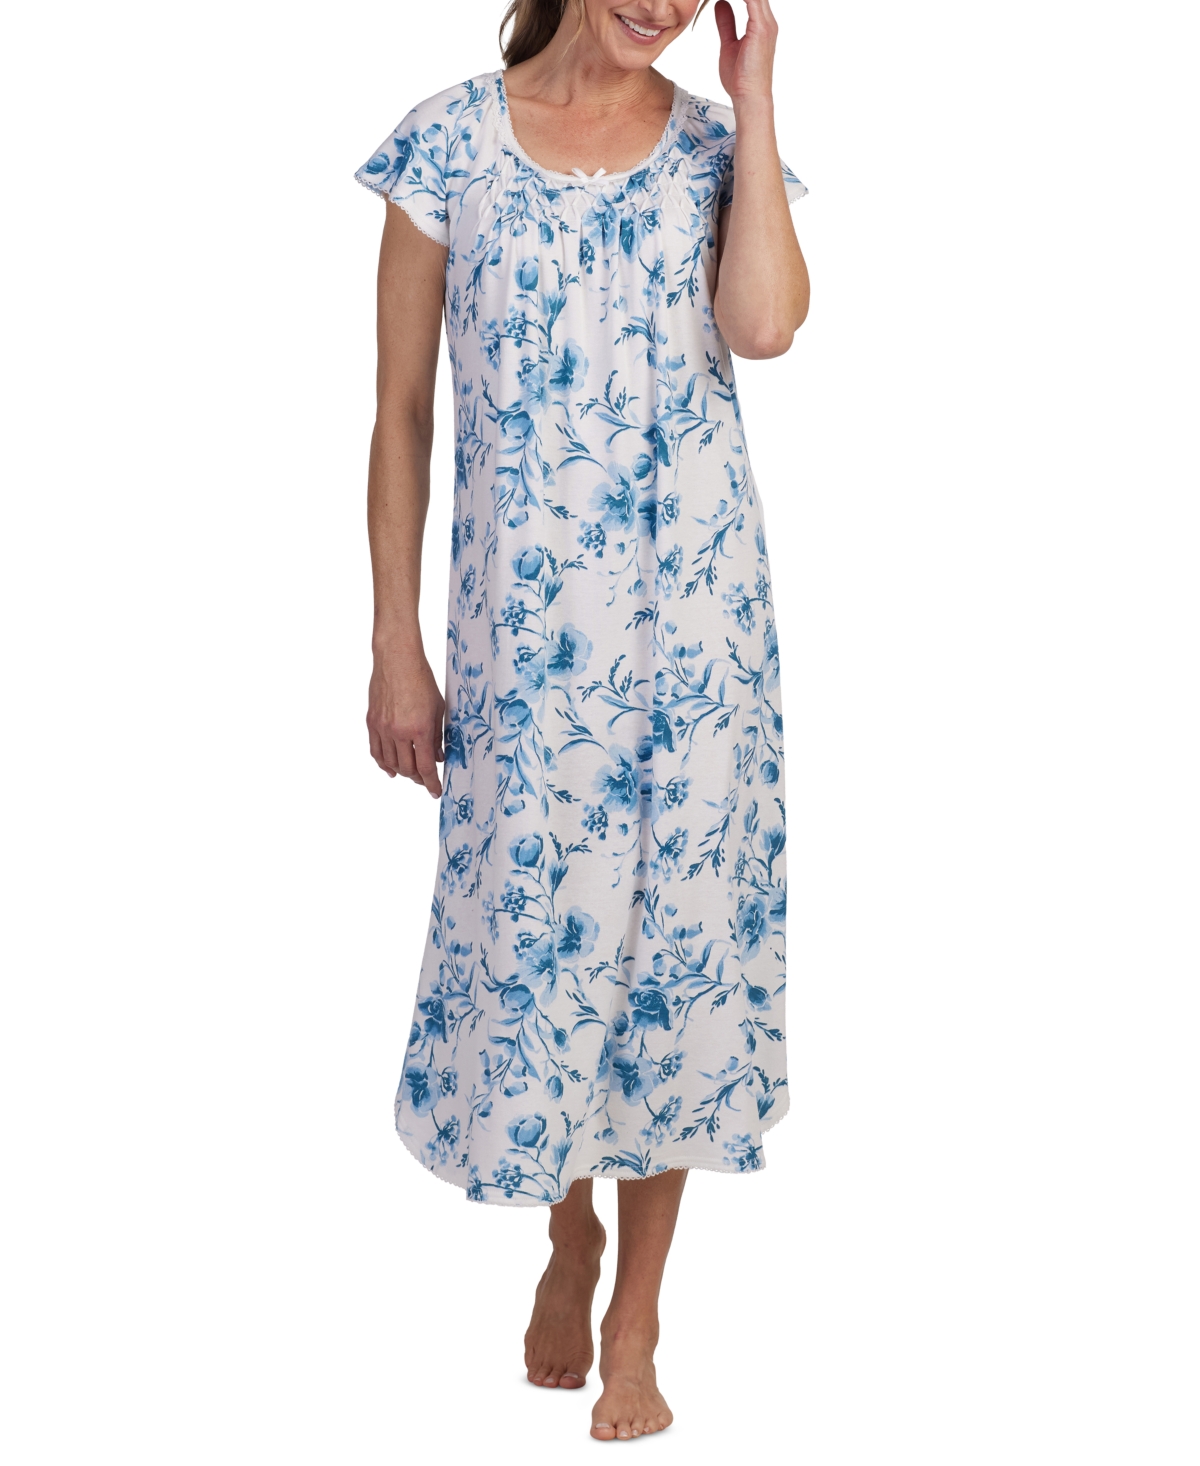 Women's Cap-Sleeve Floral Nightgown - Blue Floral